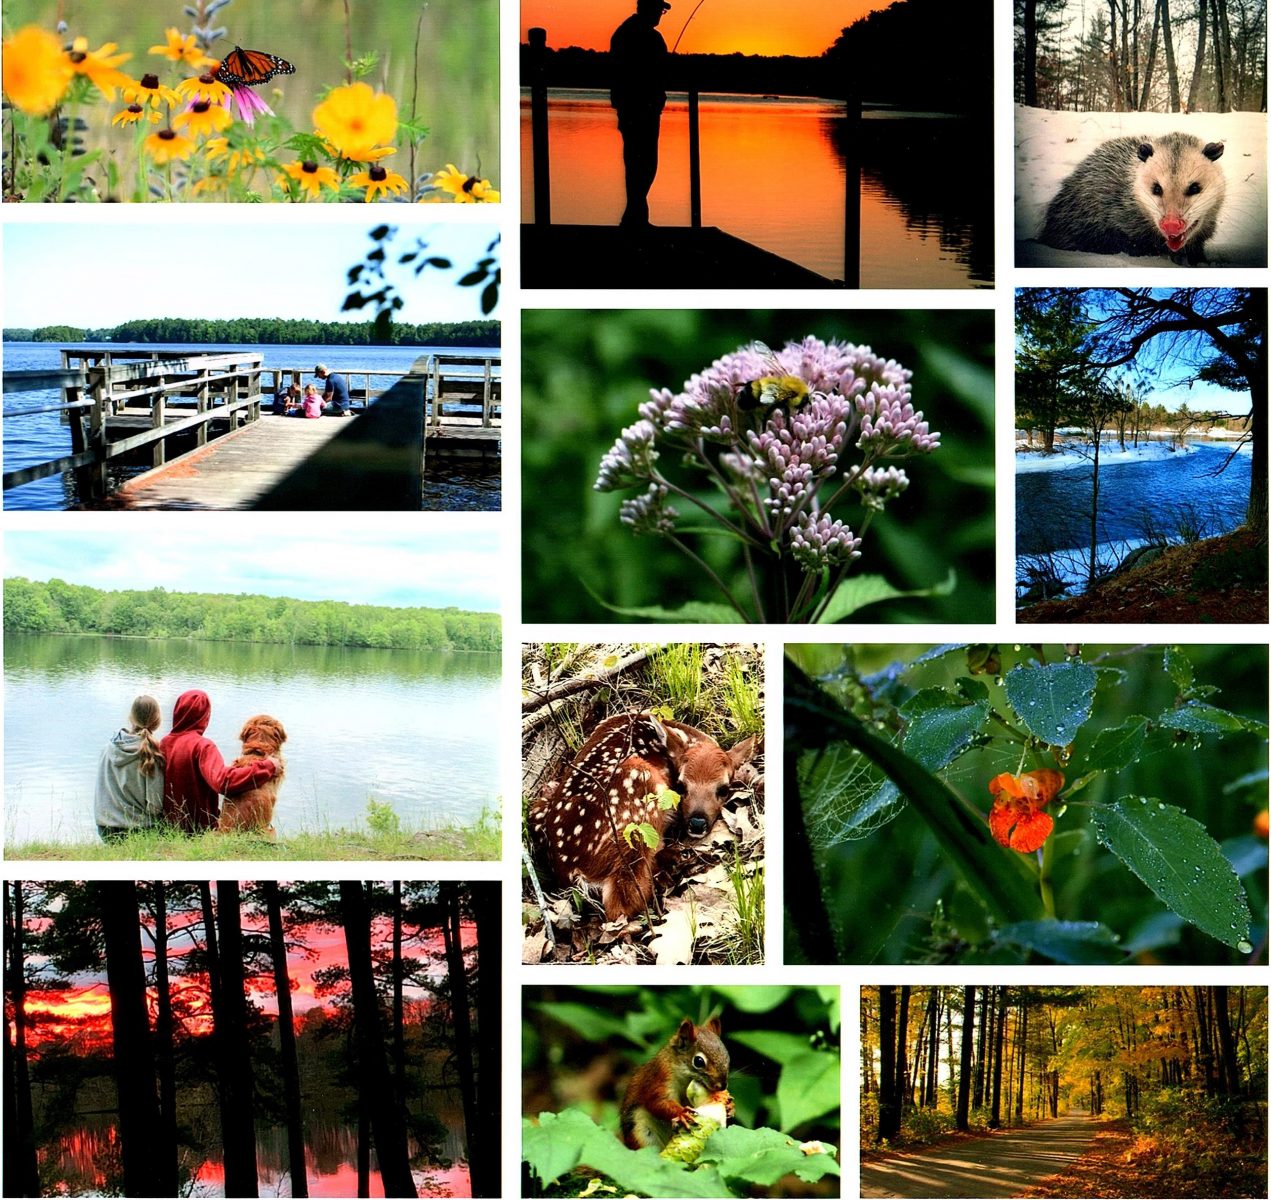 Annual Friends of Council Grounds State Park photography contest